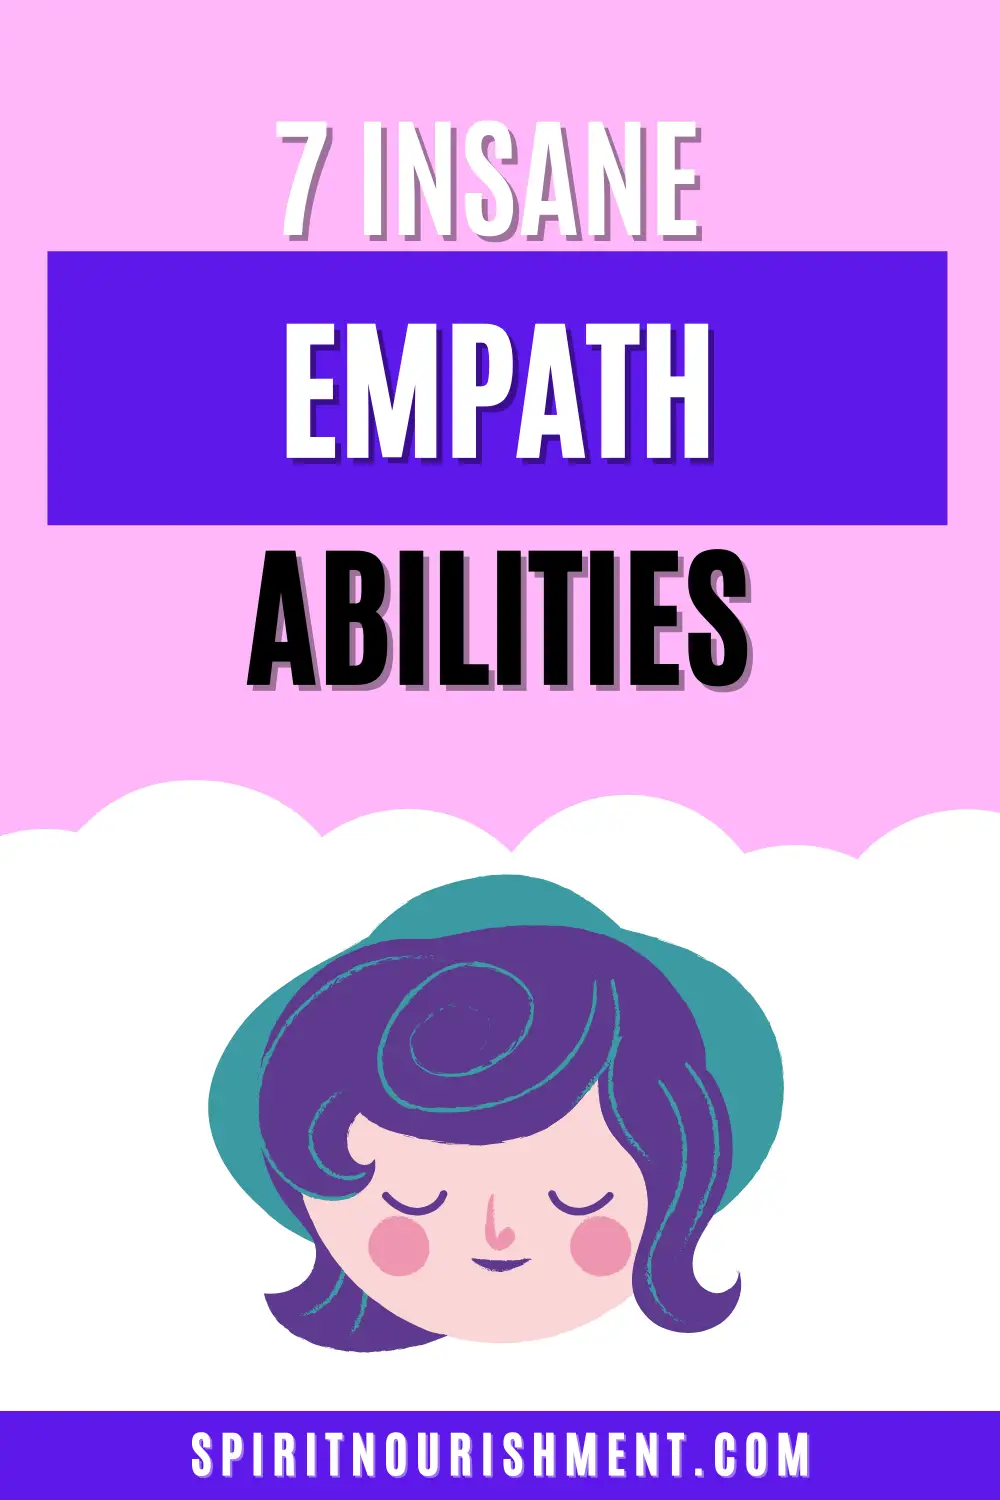 7 Insane Abilities Empaths Have & Ways to Strengthen Them!